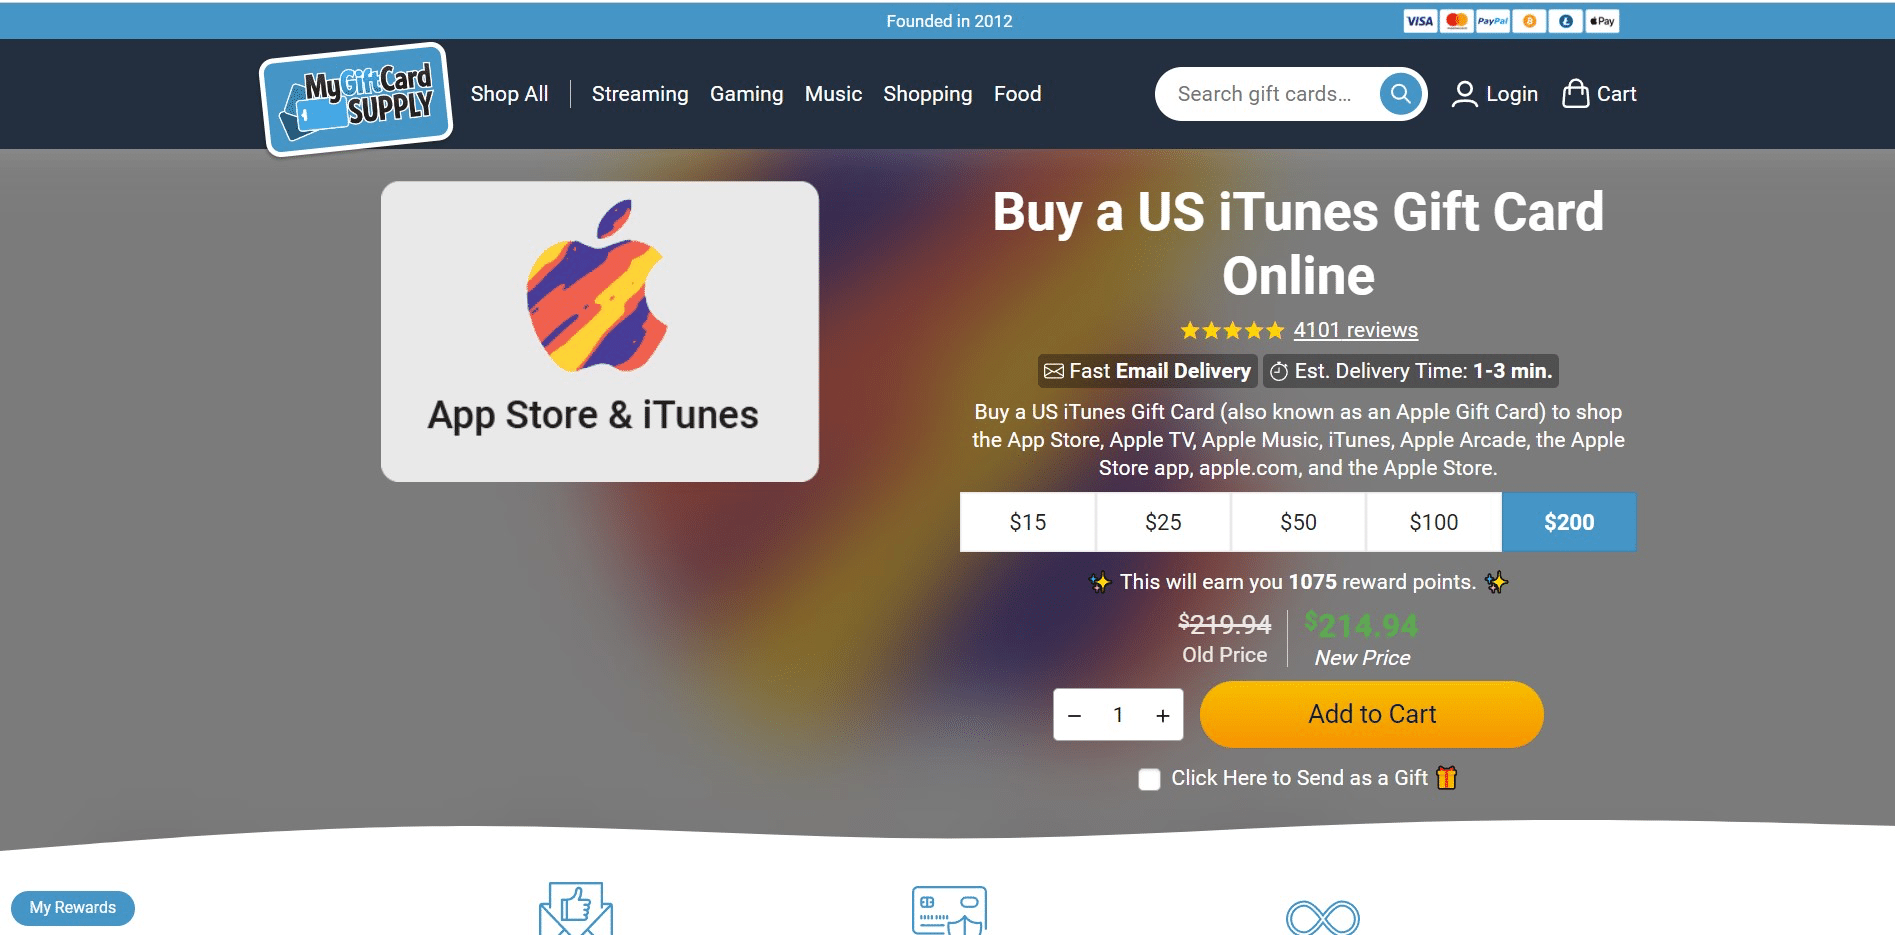 Buy US iTunes Gift Card page screenshot